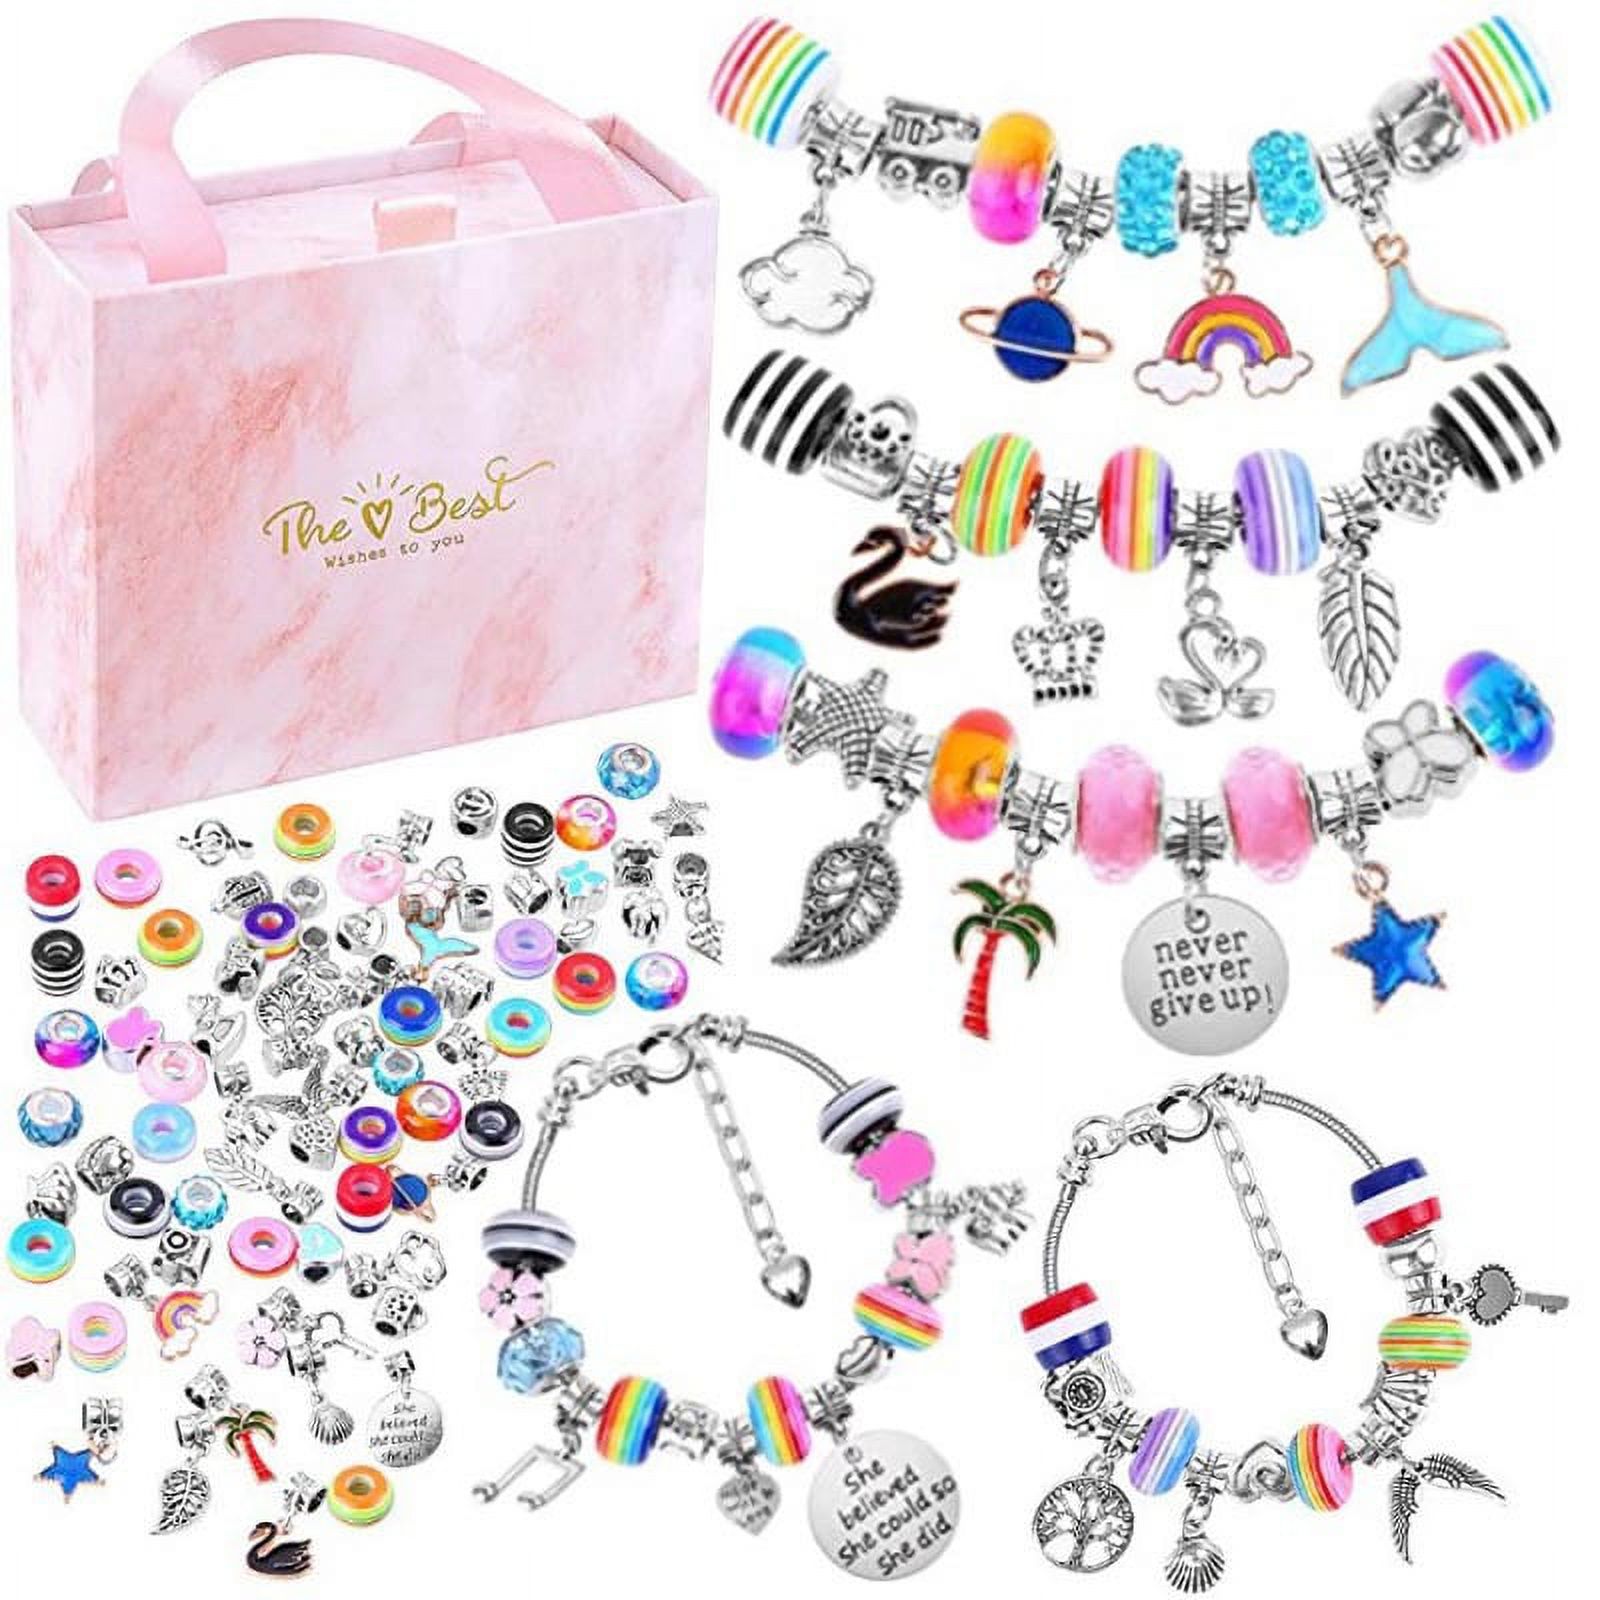 Charm Bracelet Making Kit for Girls, Kids' Jewelry Making Kits Jewelry Making Charms Bracelet Making Set with Bracelet Beads, Jewelry Charms and DIY Crafts with Gift Box 93 Pieces - image 1 of 5